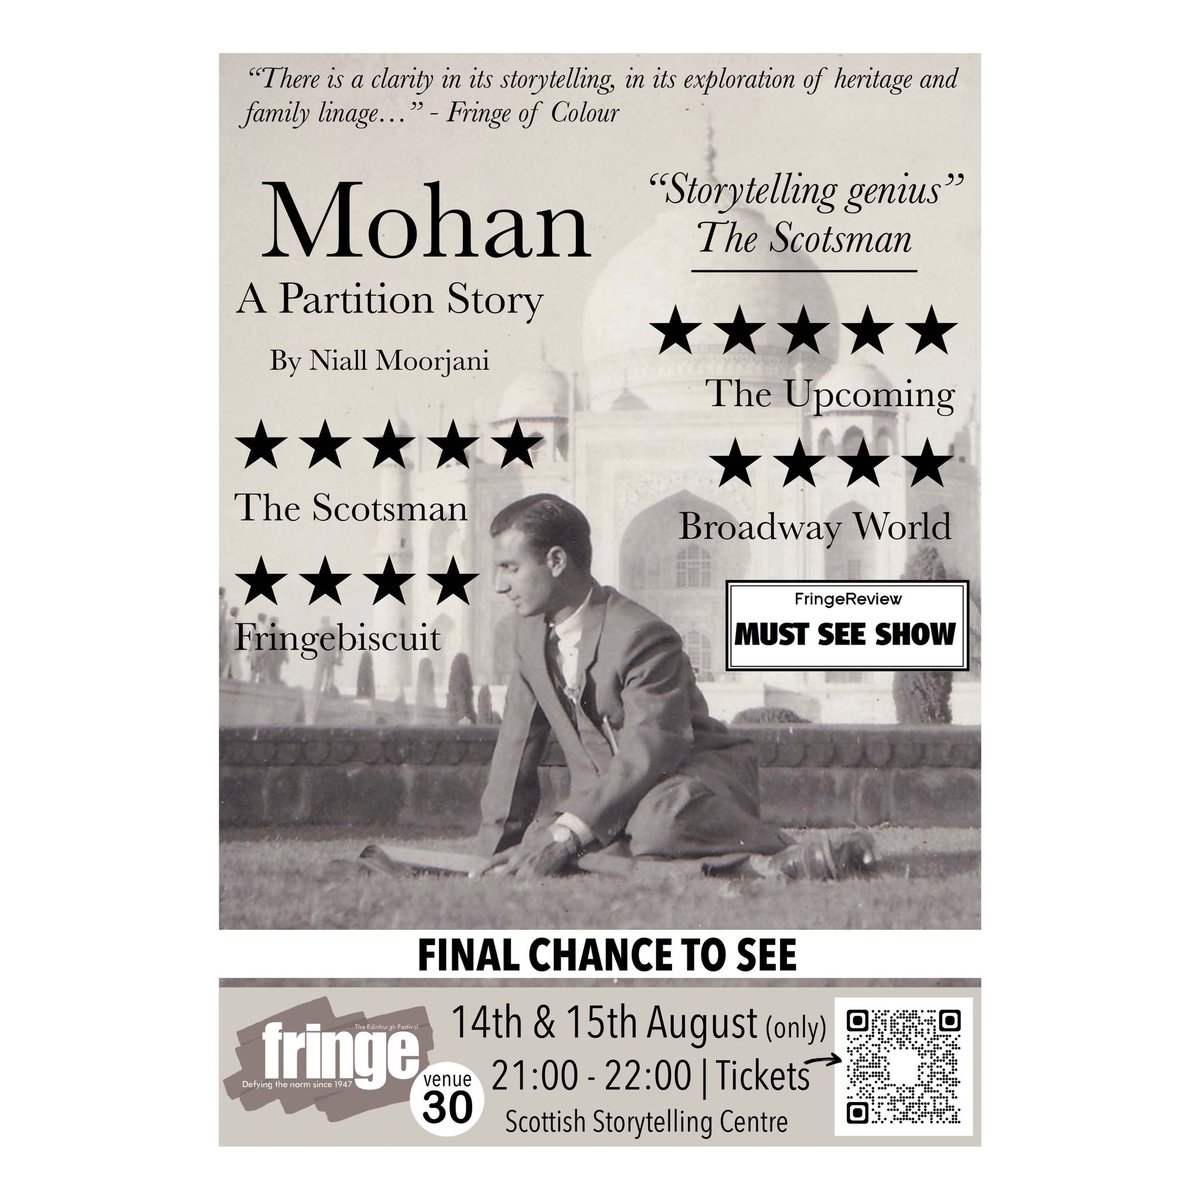 Today’s @edfringe poster reveal for Mohan.
Can’t wait to finish where it began @ScotStoryCentre 

Tickets for these shows really are going both will sell out 

Please spread the word and see you all there xxx

@SanjayLago @MukherjeeDibyo @TheScotsman